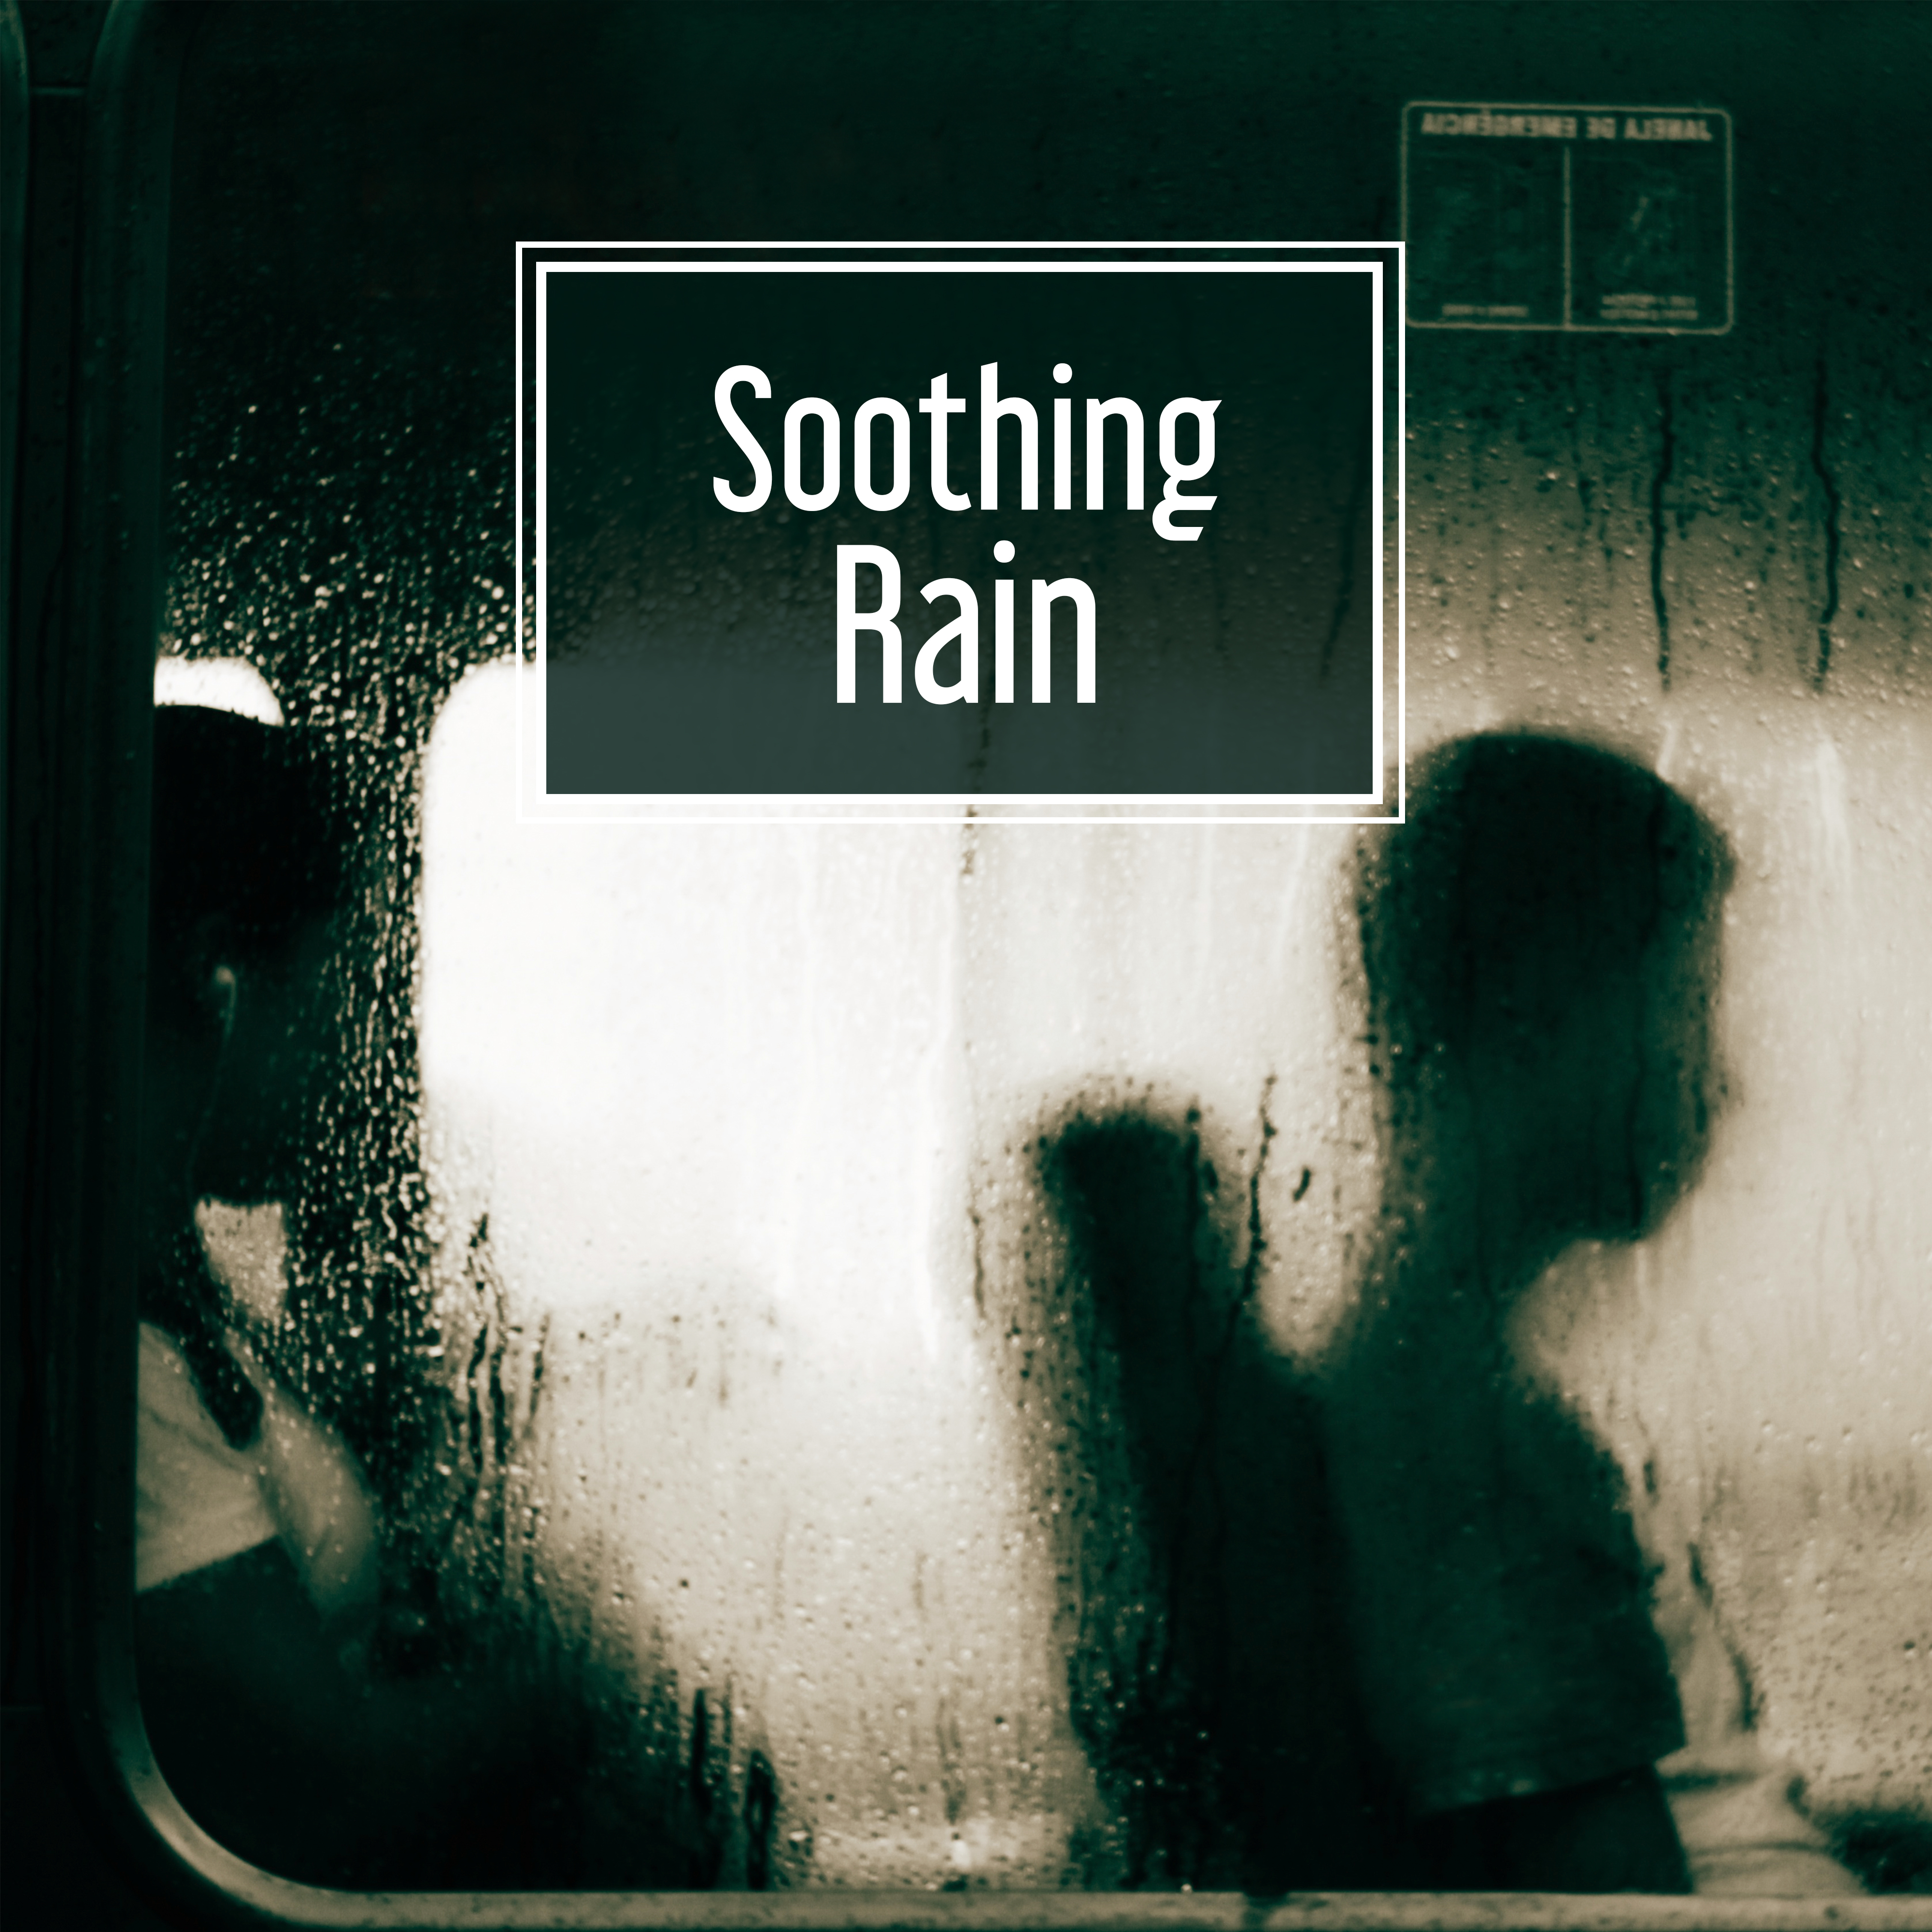 Soothing Rain  Nature Sounds for Relaxation, Deep Sleep, Soft Music, Healing Guitar to Bed, Gentle Rain for Deep Relief